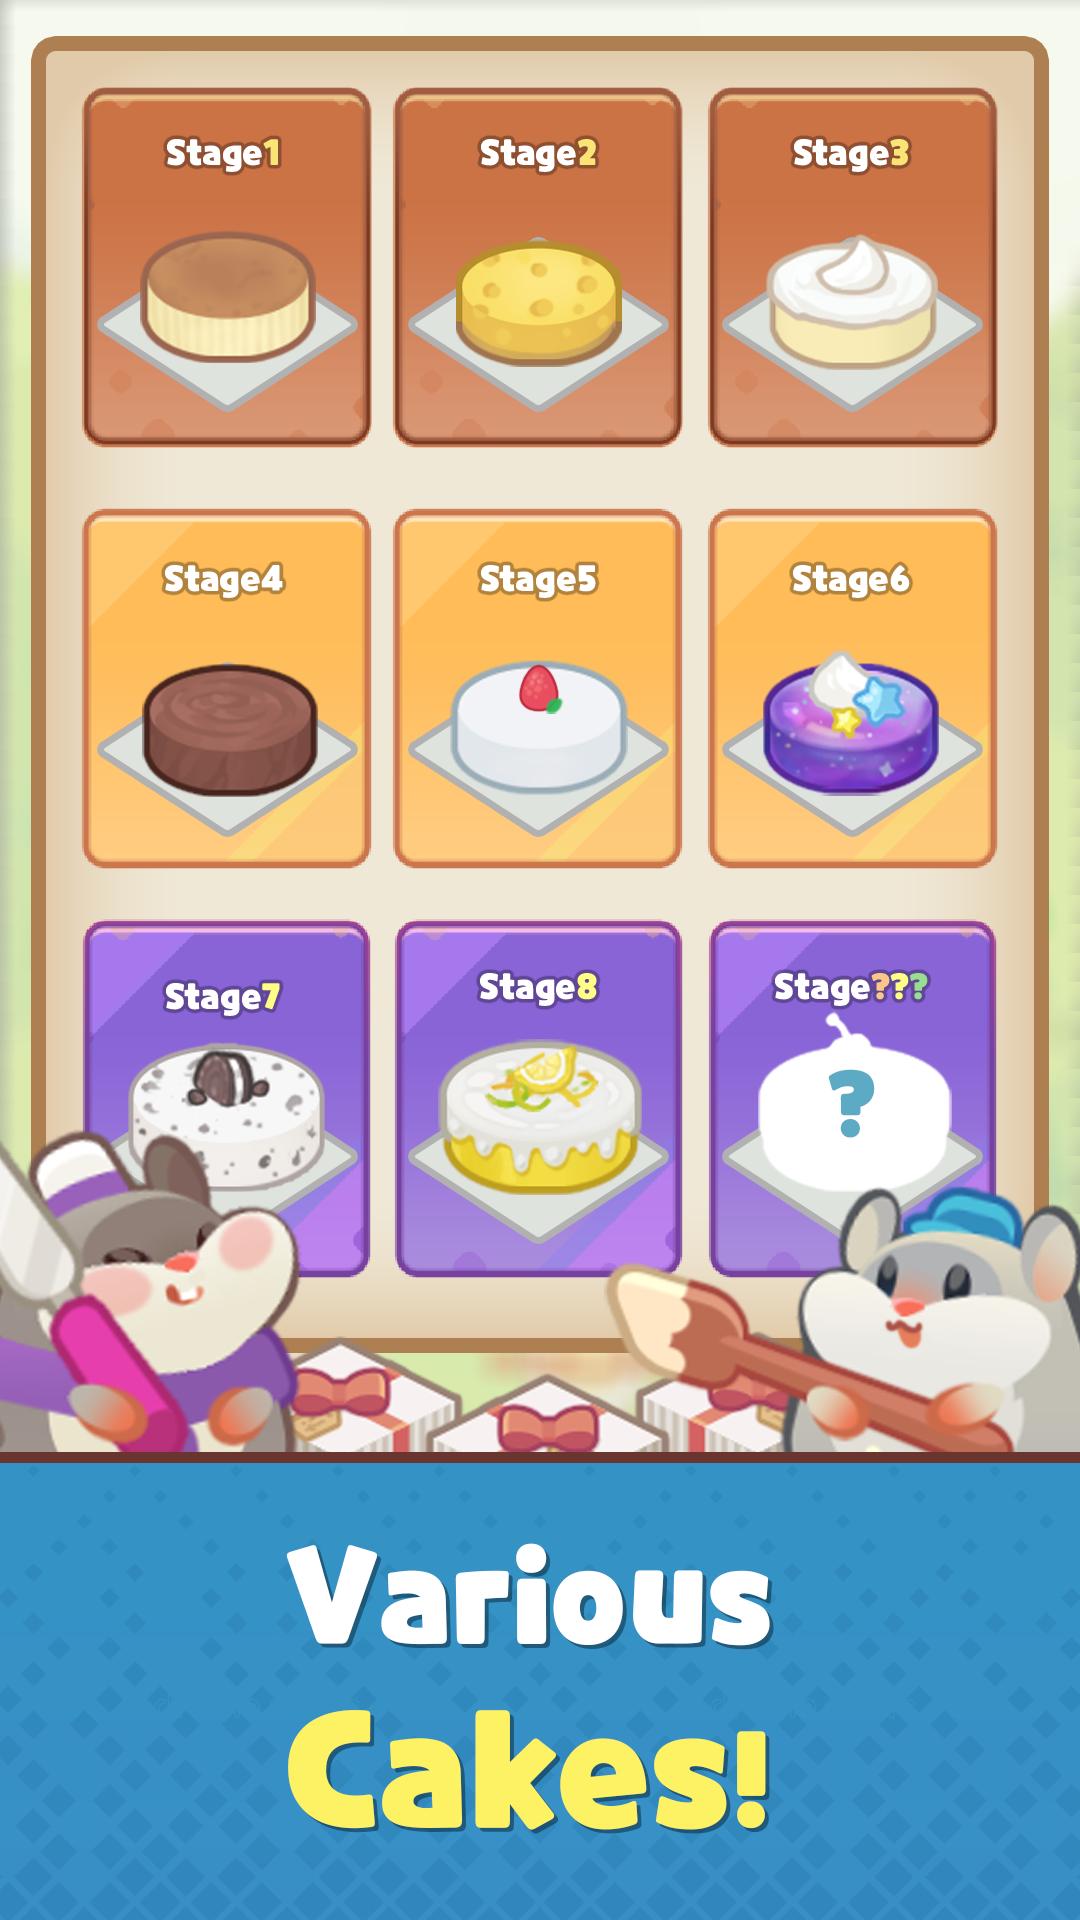 Hamster's Cake Factory - Idle Baking Manager 1.0.2 Screenshot 20